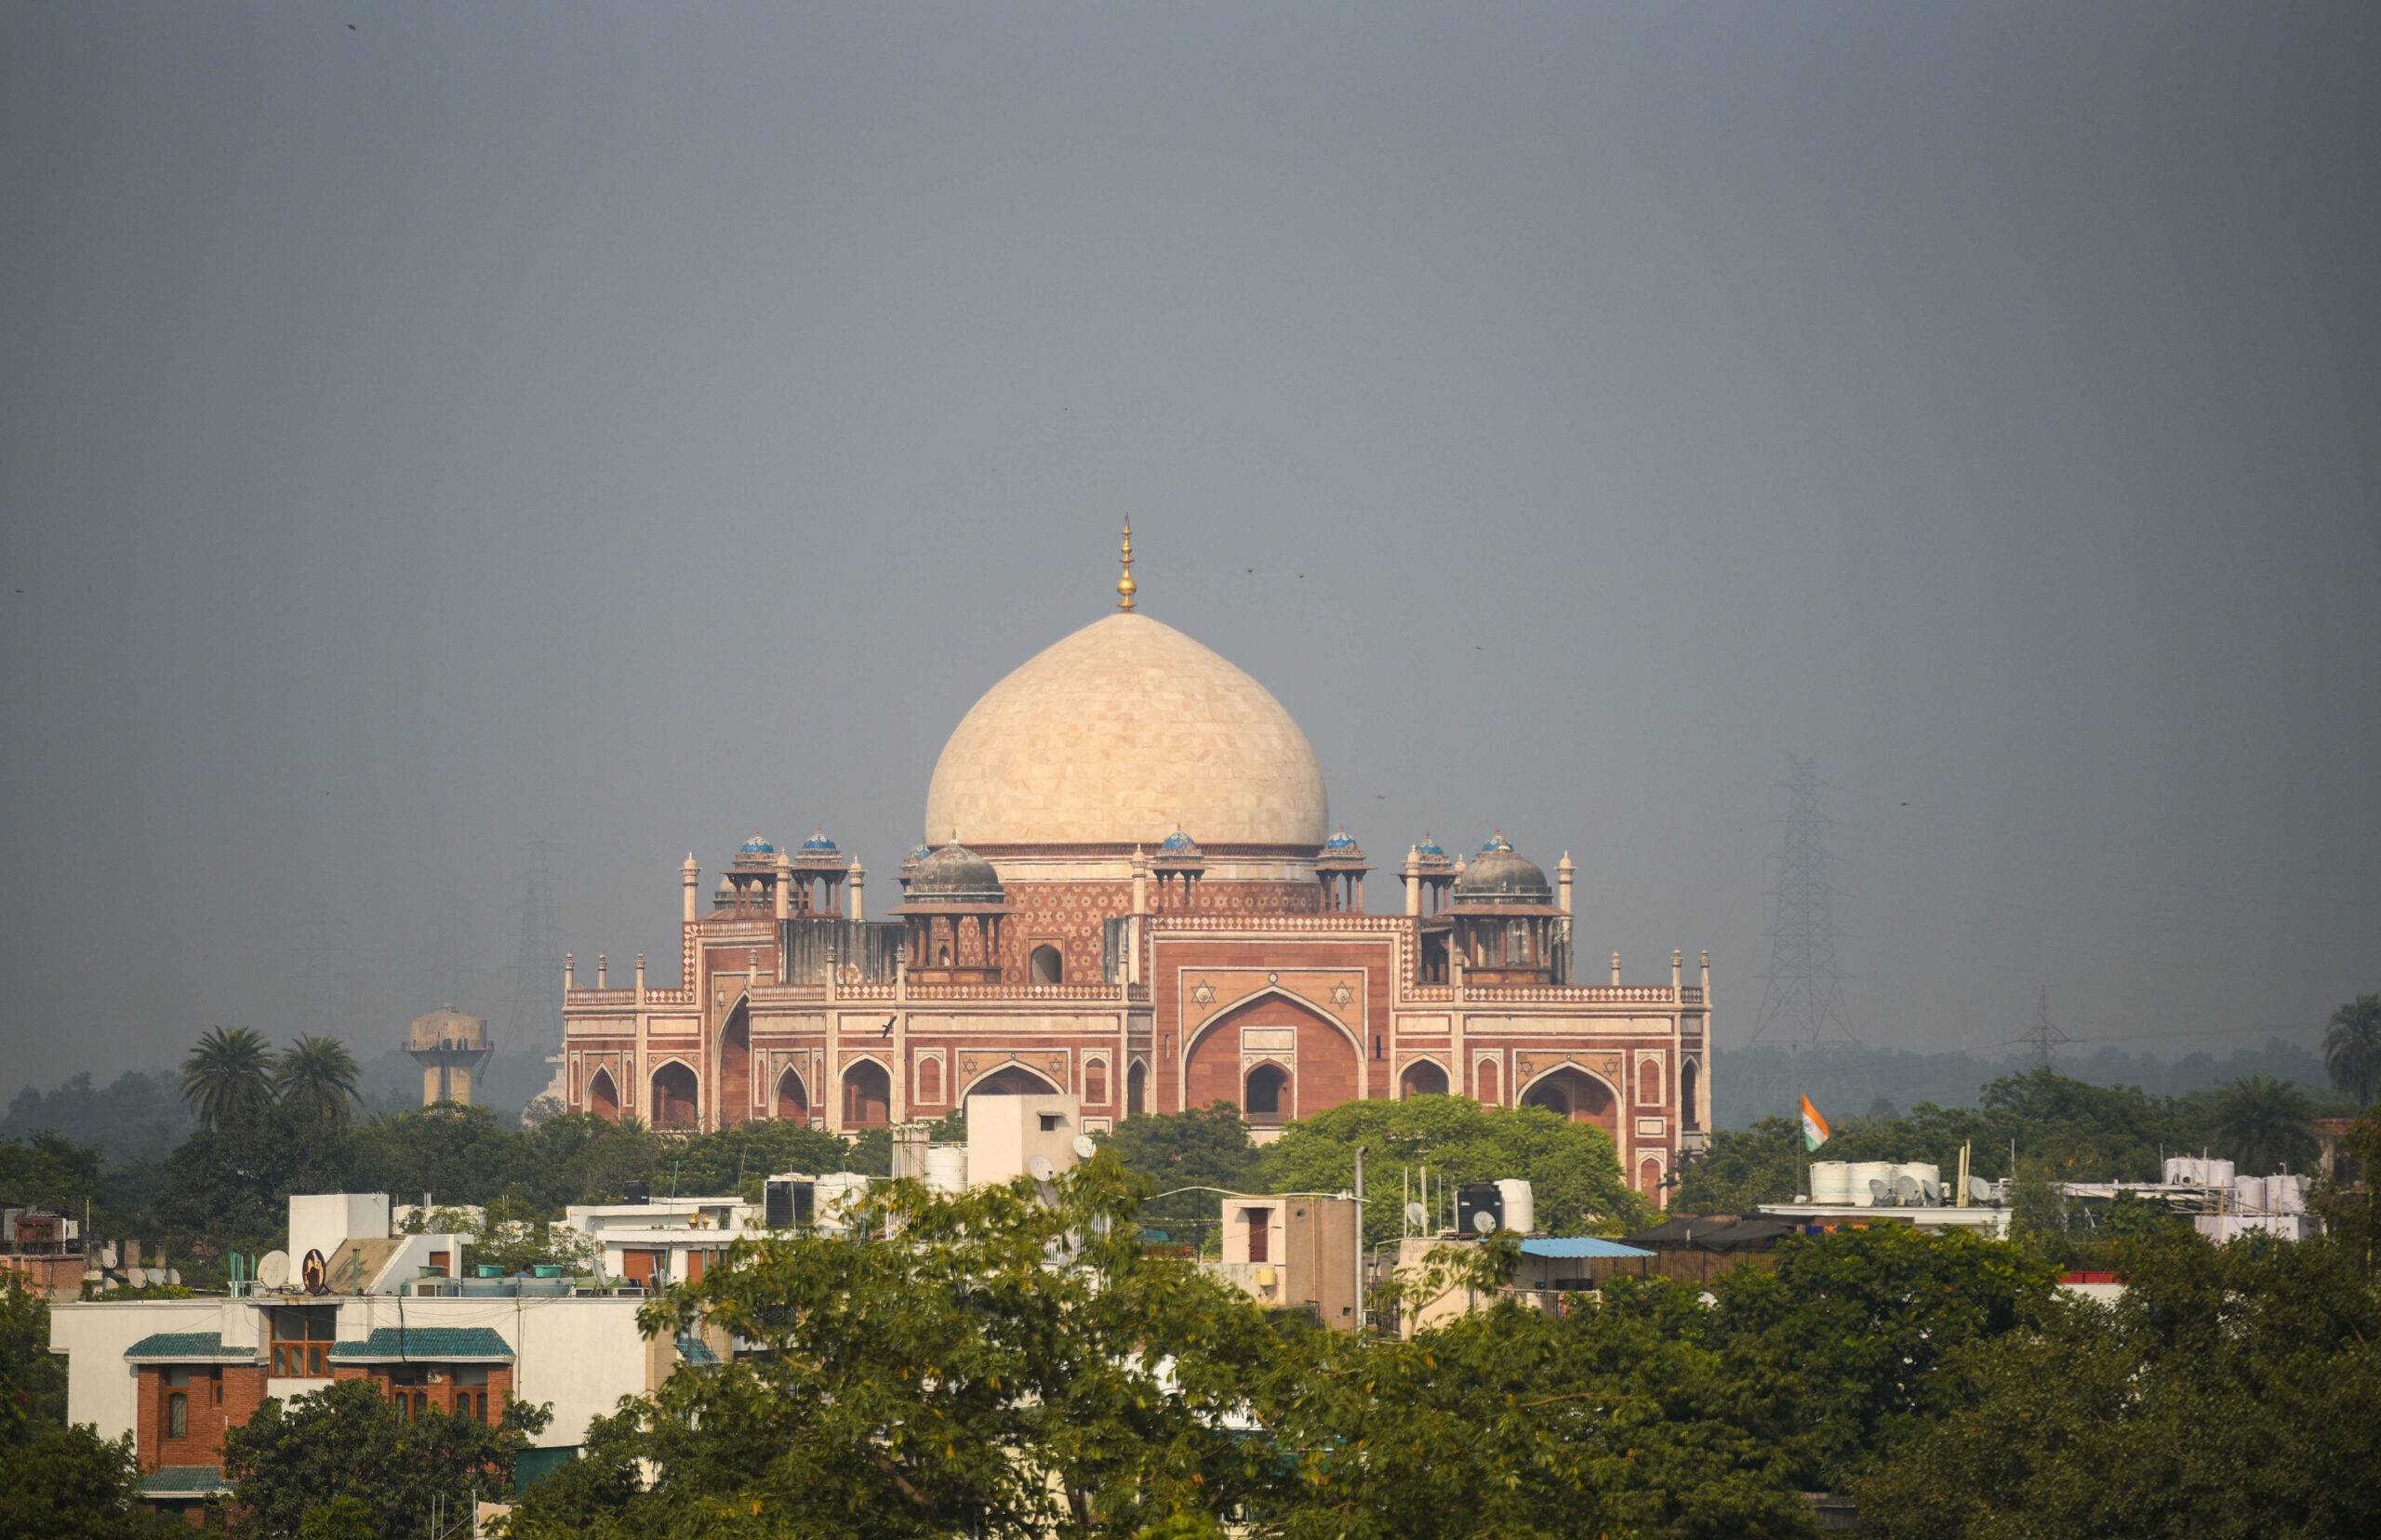 Mandatory Credit: Photo by Amal KS/Hindustan Times/Shutterstock (11024438a)
A view showing hazy skies above Humayun's Tomb, at Nizamuddin on November 19, 2020 in New Delhi, India. A layer of haze continued to engulf the national capital on Thursday as air pollution worsened here with several parts reporting an Air Quality Index (AQI) hovering between 'poor' and 'very poor' category.
Air Quality Worsens From Moderate To Poor In Some Parts In Delhi, New Delhi, India - 19 Nov 2020/shutterstock_editorial_Air_Quality_Worsens_From_Moderat_11024438A//2011200102